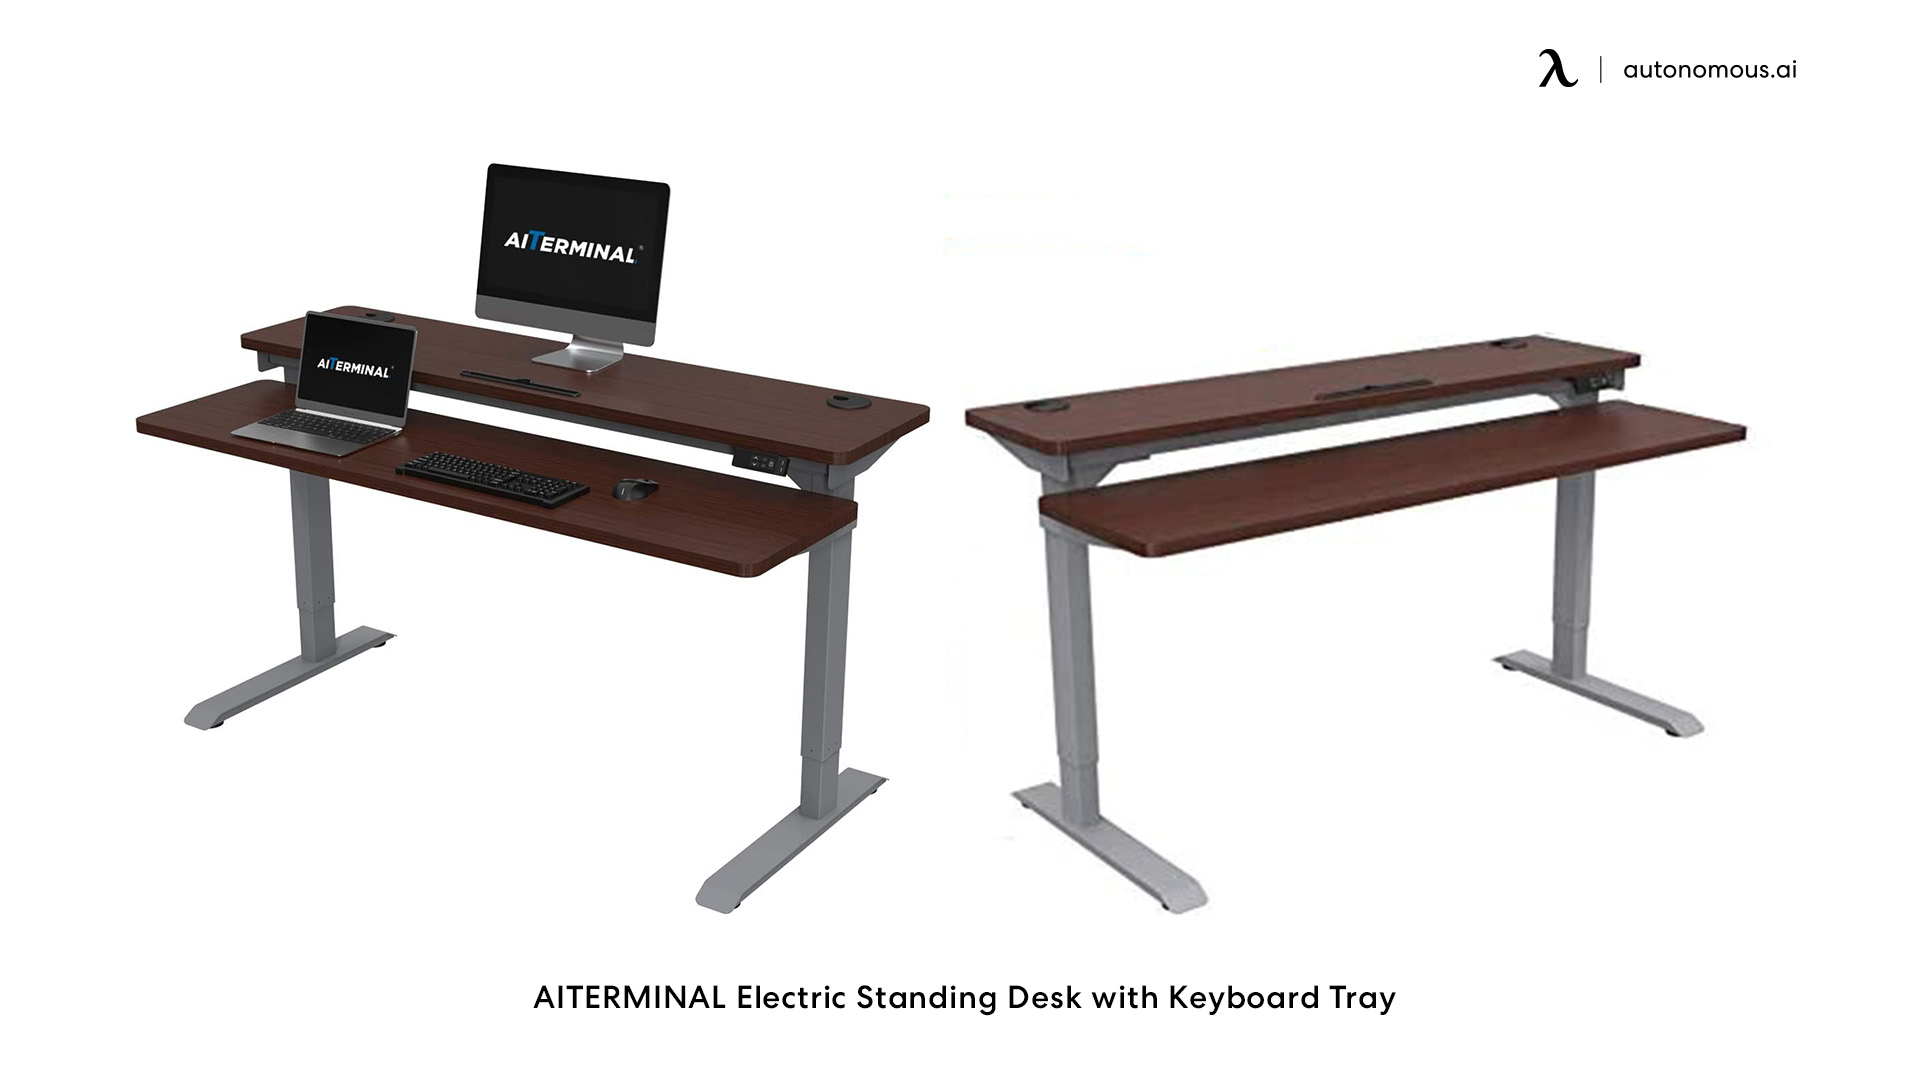 AITERMINAL standing desk with keyboard tray